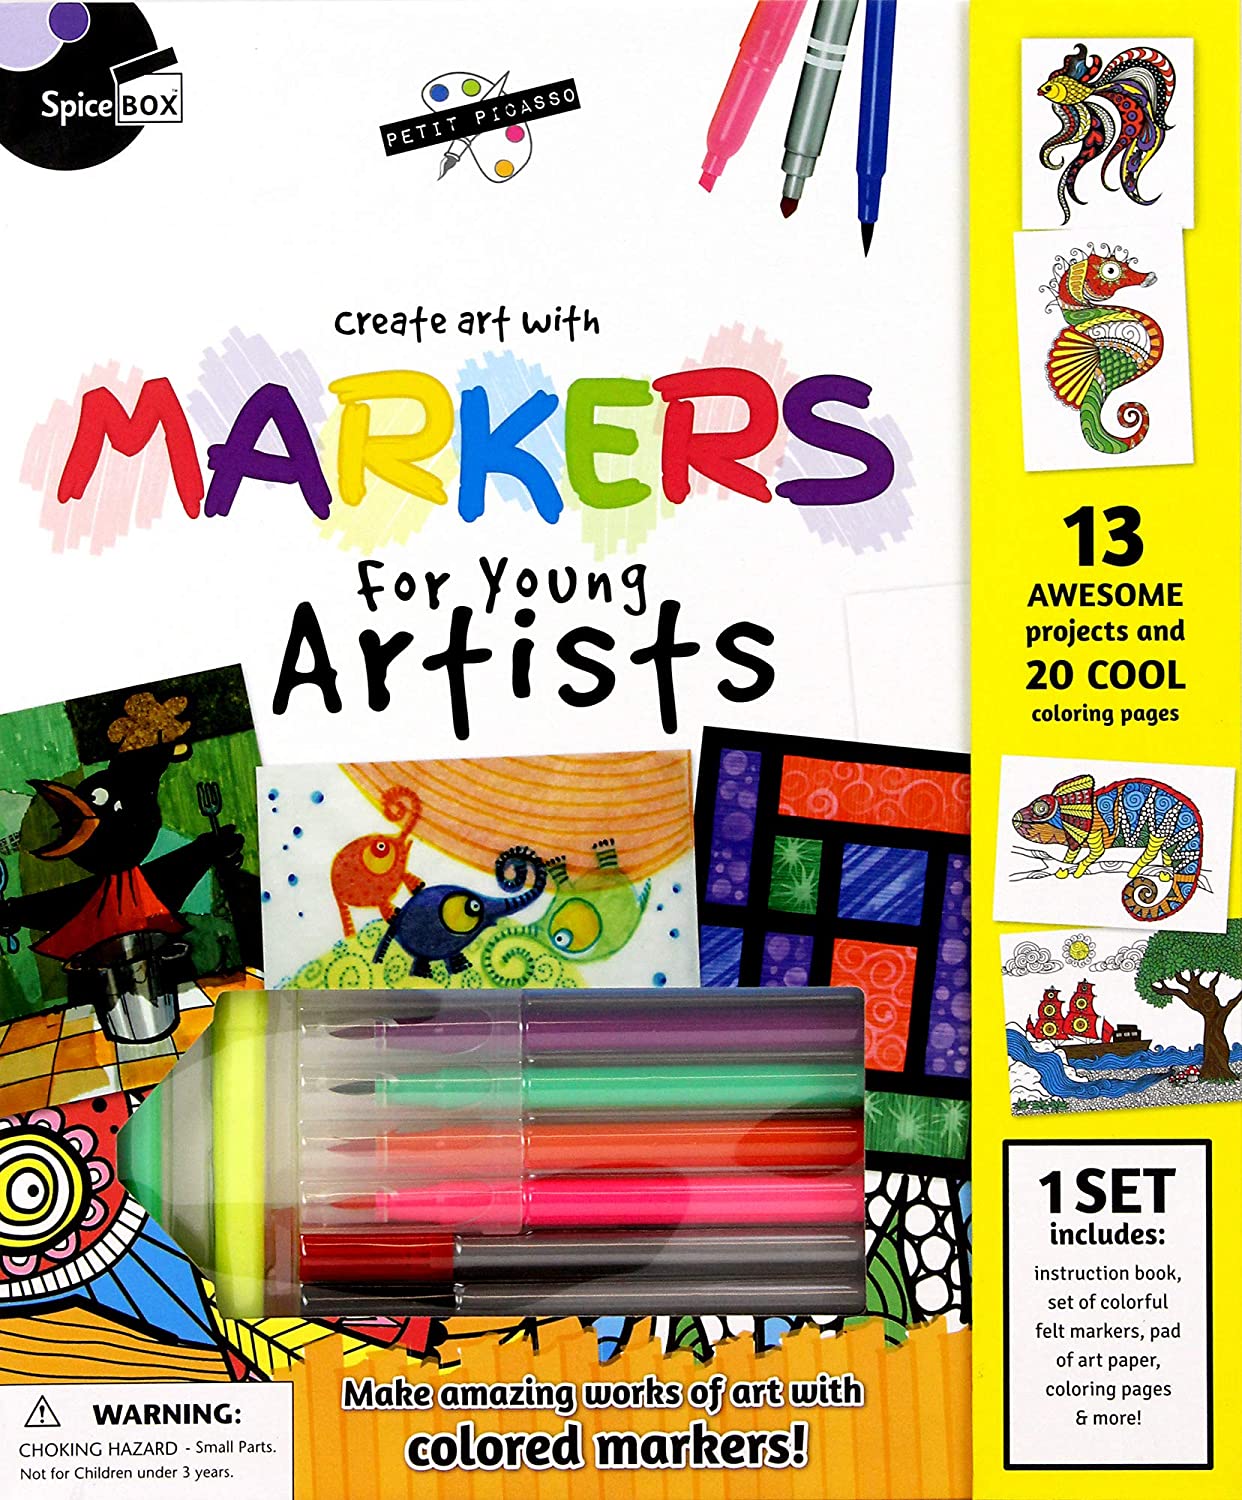 Spice Box Petit Picasso Markers for Young Artists – Awesome Toys Gifts